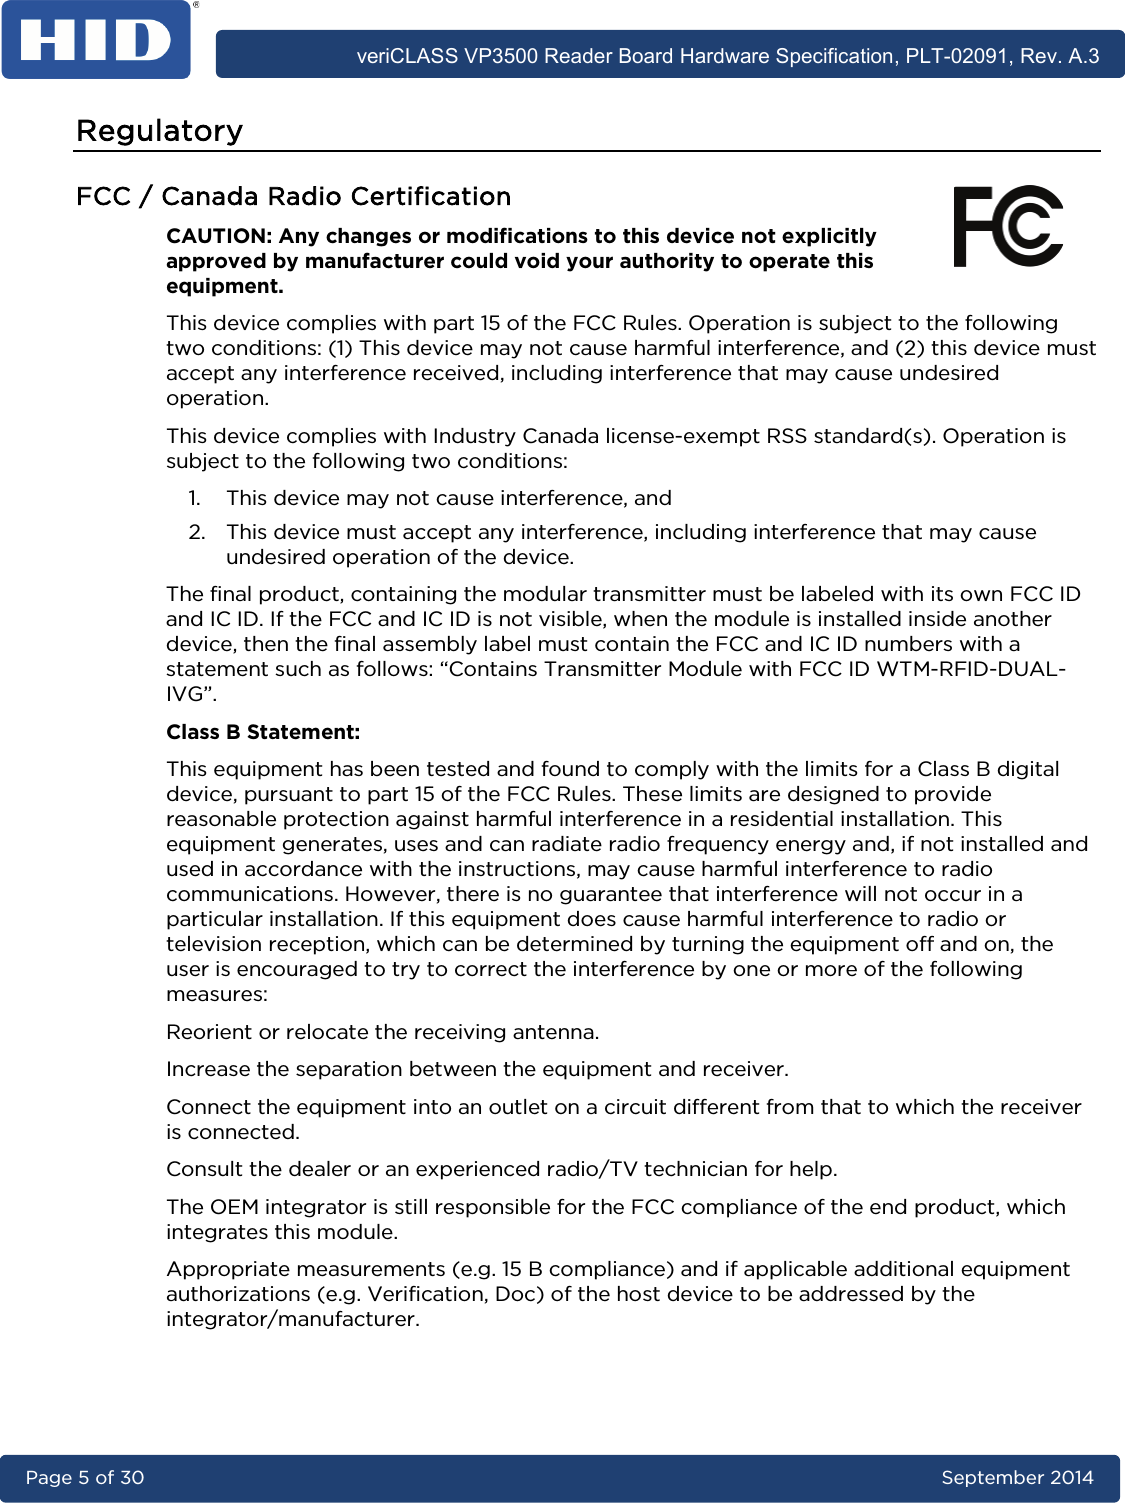      veriCLASS VP3500 Reader Board Hardware Specification, PLT-02091, Rev. A.3 Page 5 of 30   September 2014  Regulatory FCC / Canada Radio Certification CAUTION: Any changes or modiﬁcations to this device not explicitly approved by manufacturer could void your authority to operate this equipment. This device complies with part 15 of the FCC Rules. Operation is subject to the following two conditions: (1) This device may not cause harmful interference, and (2) this device must accept any interference received, including interference that may cause undesired operation. This device complies with Industry Canada license-exempt RSS standard(s). Operation is subject to the following two conditions:  1. This device may not cause interference, and  2. This device must accept any interference, including interference that may cause undesired operation of the device. The final product, containing the modular transmitter must be labeled with its own FCC ID and IC ID. If the FCC and IC ID is not visible, when the module is installed inside another device, then the final assembly label must contain the FCC and IC ID numbers with a statement such as follows: “Contains Transmitter Module with FCC ID WTM-RFID-DUAL-IVG”. Class B Statement: This equipment has been tested and found to comply with the limits for a Class B digital device, pursuant to part 15 of the FCC Rules. These limits are designed to provide reasonable protection against harmful interference in a residential installation. This equipment generates, uses and can radiate radio frequency energy and, if not installed and used in accordance with the instructions, may cause harmful interference to radio communications. However, there is no guarantee that interference will not occur in a particular installation. If this equipment does cause harmful interference to radio or television reception, which can be determined by turning the equipment off and on, the user is encouraged to try to correct the interference by one or more of the following measures: Reorient or relocate the receiving antenna. Increase the separation between the equipment and receiver. Connect the equipment into an outlet on a circuit different from that to which the receiver is connected. Consult the dealer or an experienced radio/TV technician for help. The OEM integrator is still responsible for the FCC compliance of the end product, which integrates this module.  Appropriate measurements (e.g. 15 B compliance) and if applicable additional equipment authorizations (e.g. Verification, Doc) of the host device to be addressed by the integrator/manufacturer.  